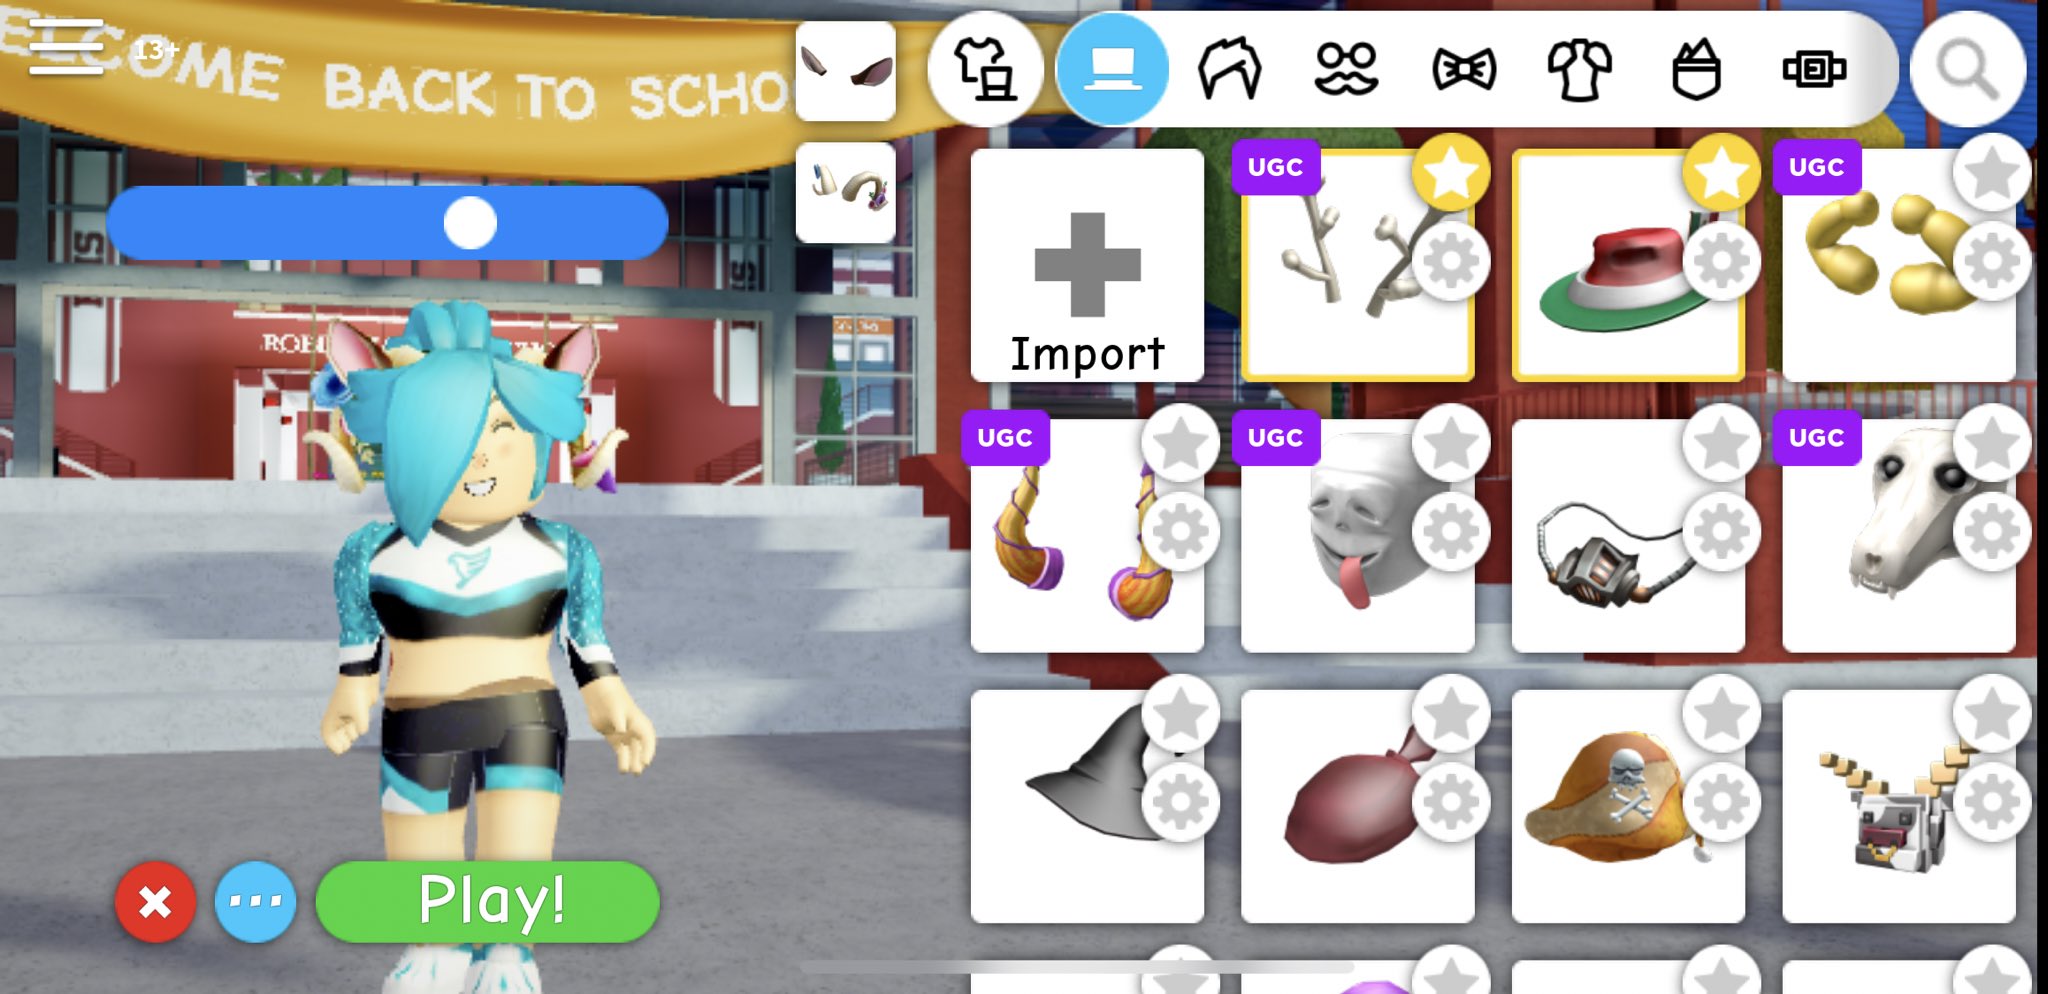 Robloxian High School On Twitter Last Night We Released An Update To The Avatar Editor That Squashed Some Bugs And Improves Your Experience Bubble Chat Hidden In Editor Can Now - roblox advanced avatar editor 2020